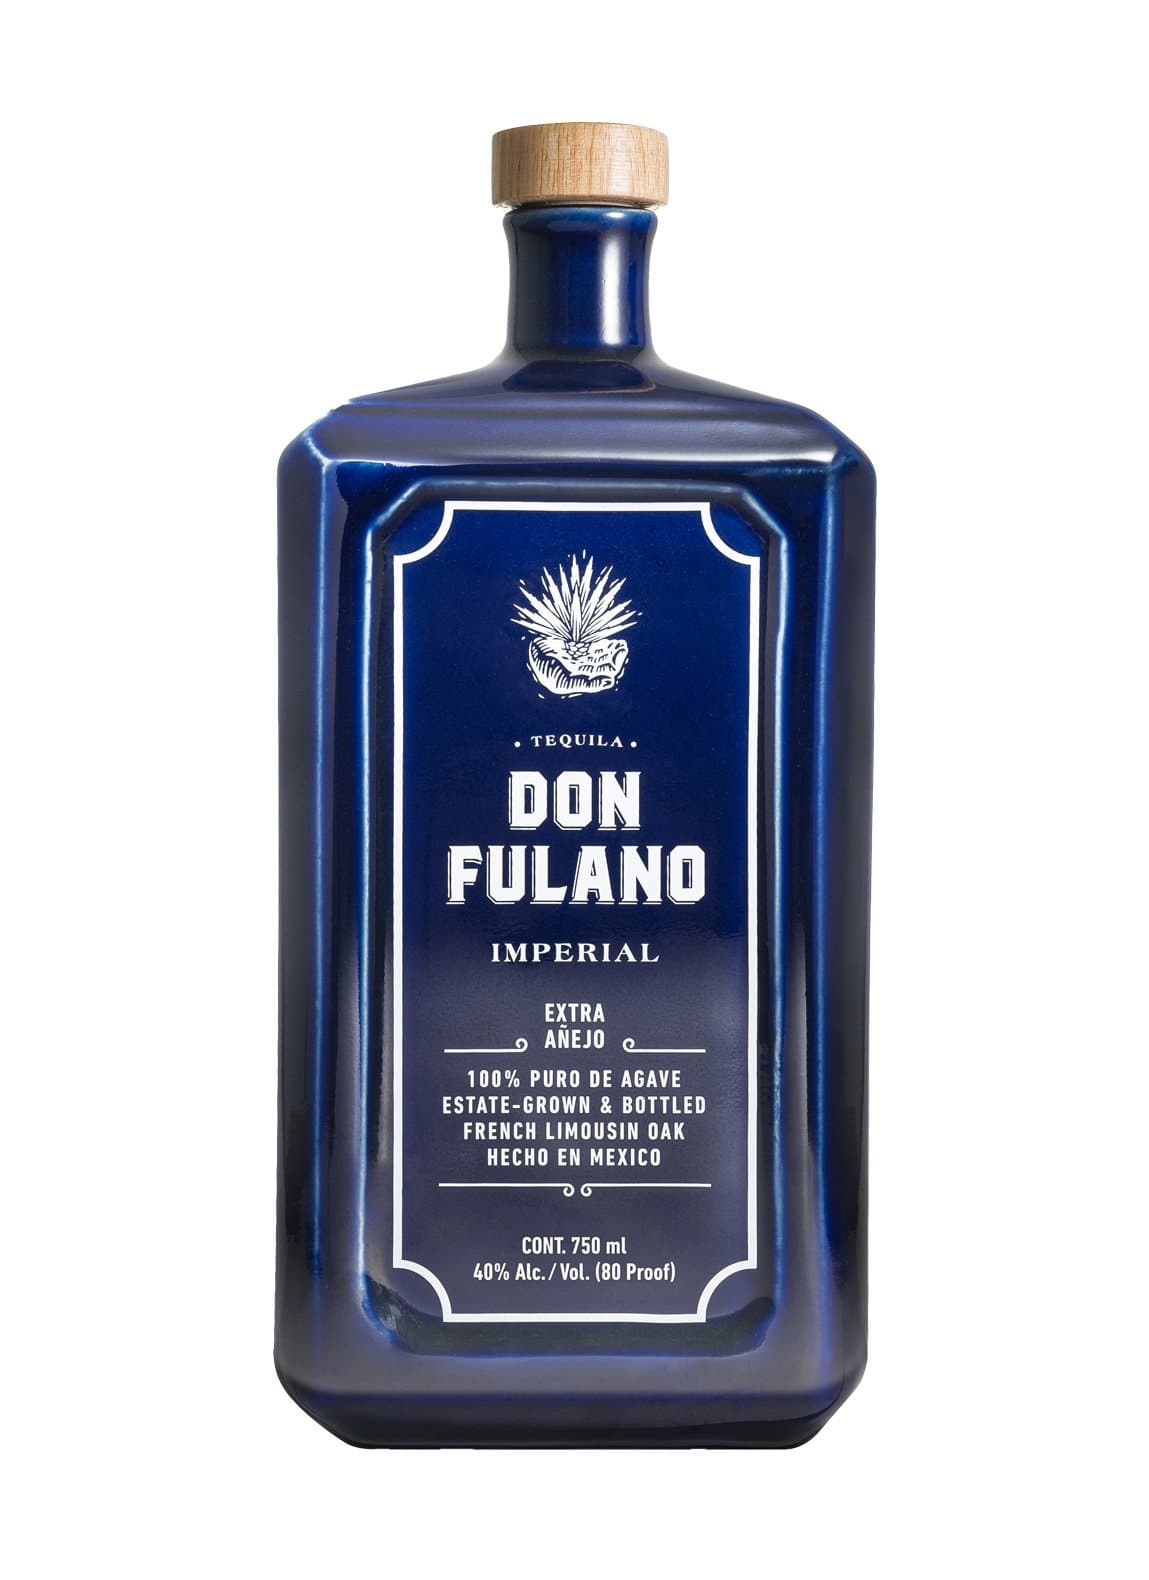 Don Fulano Imperial Extra Anejo Tequila 40% 700ml | Tequila | Shop online at Spirits of France